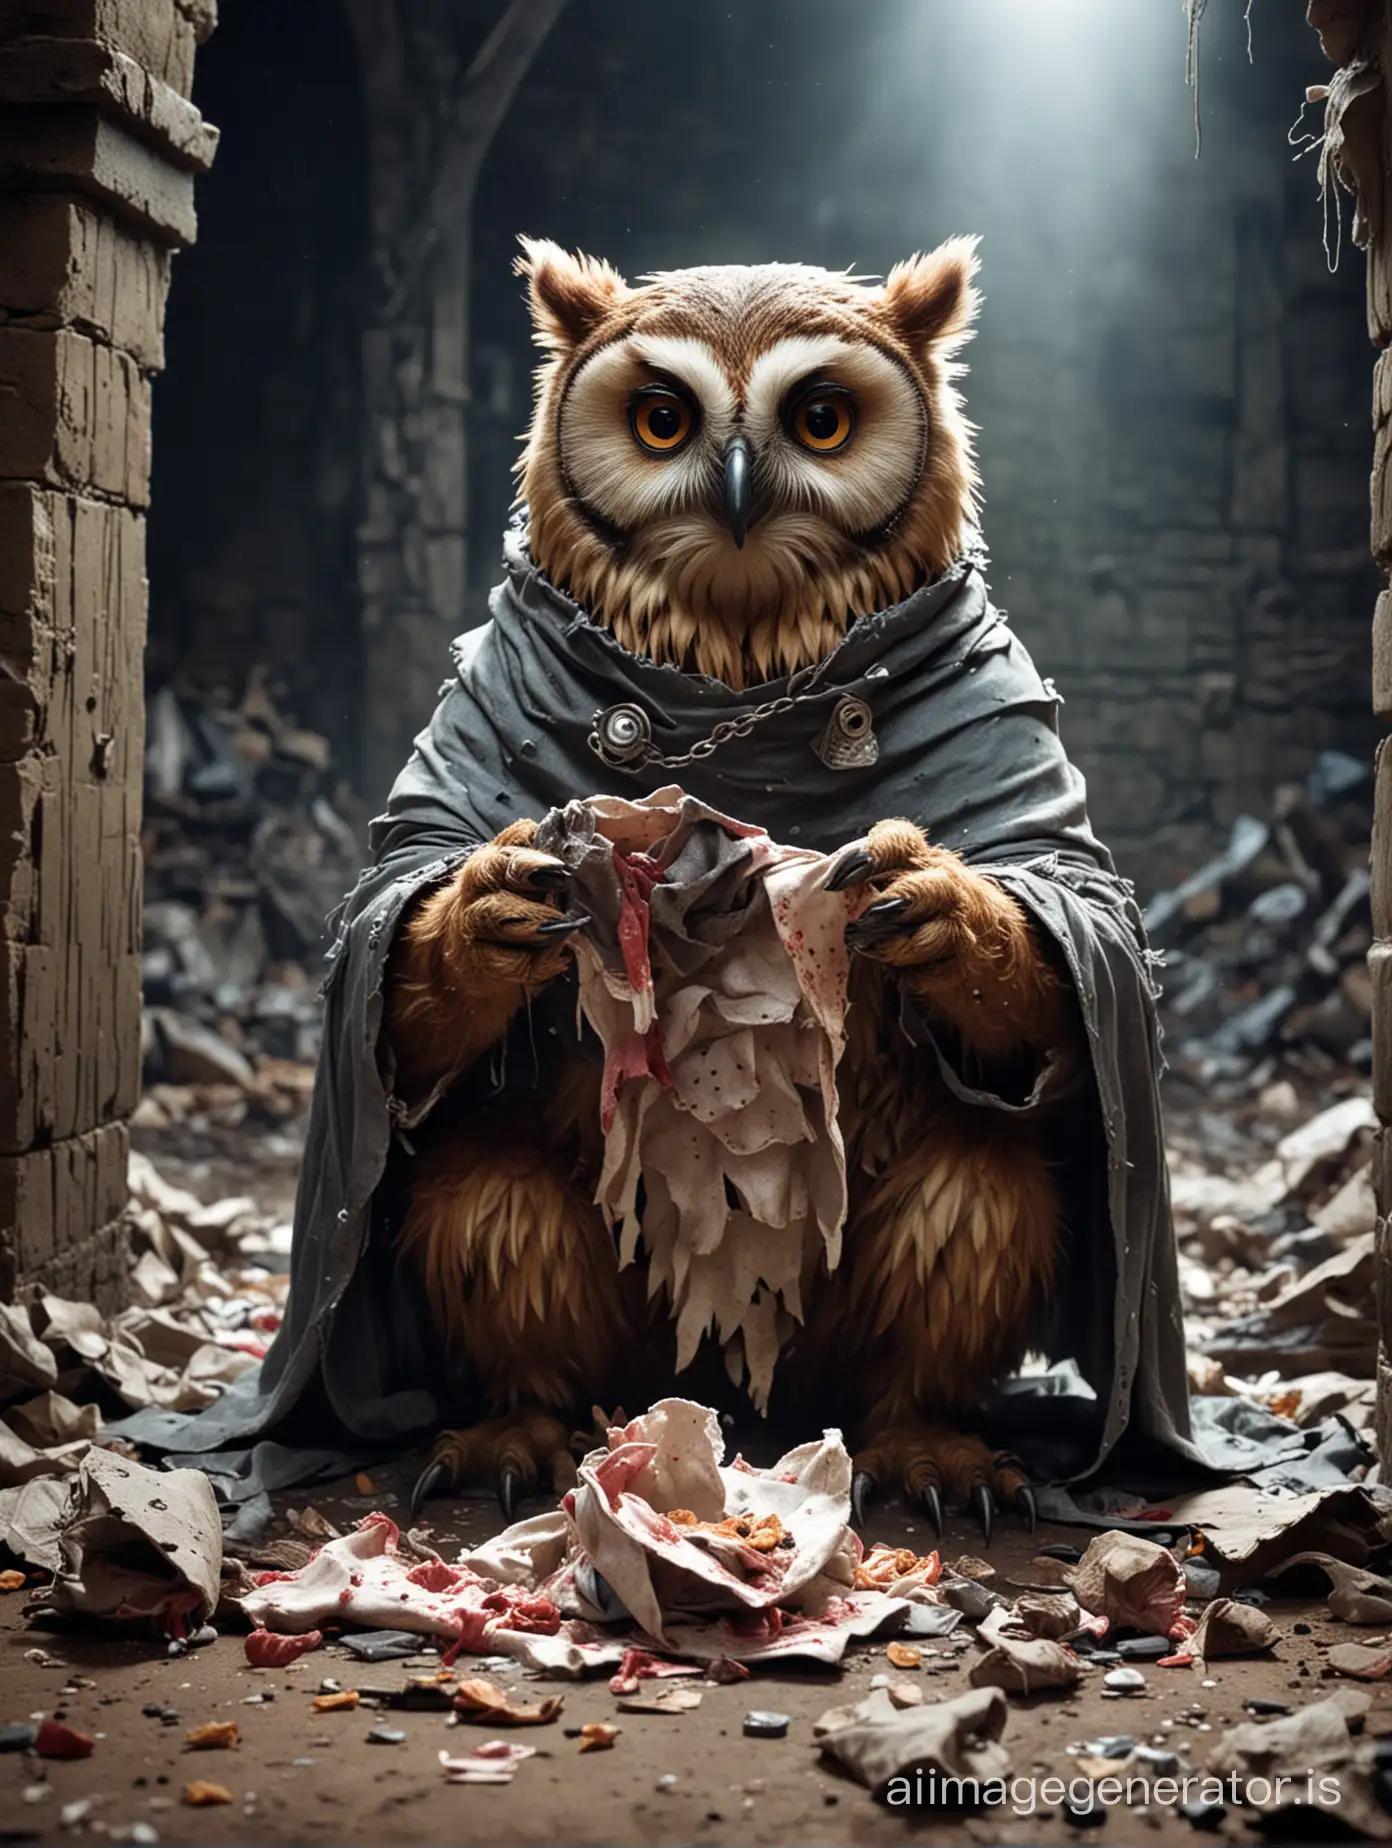 bear-owl in a dungeon eating ripped up clothes